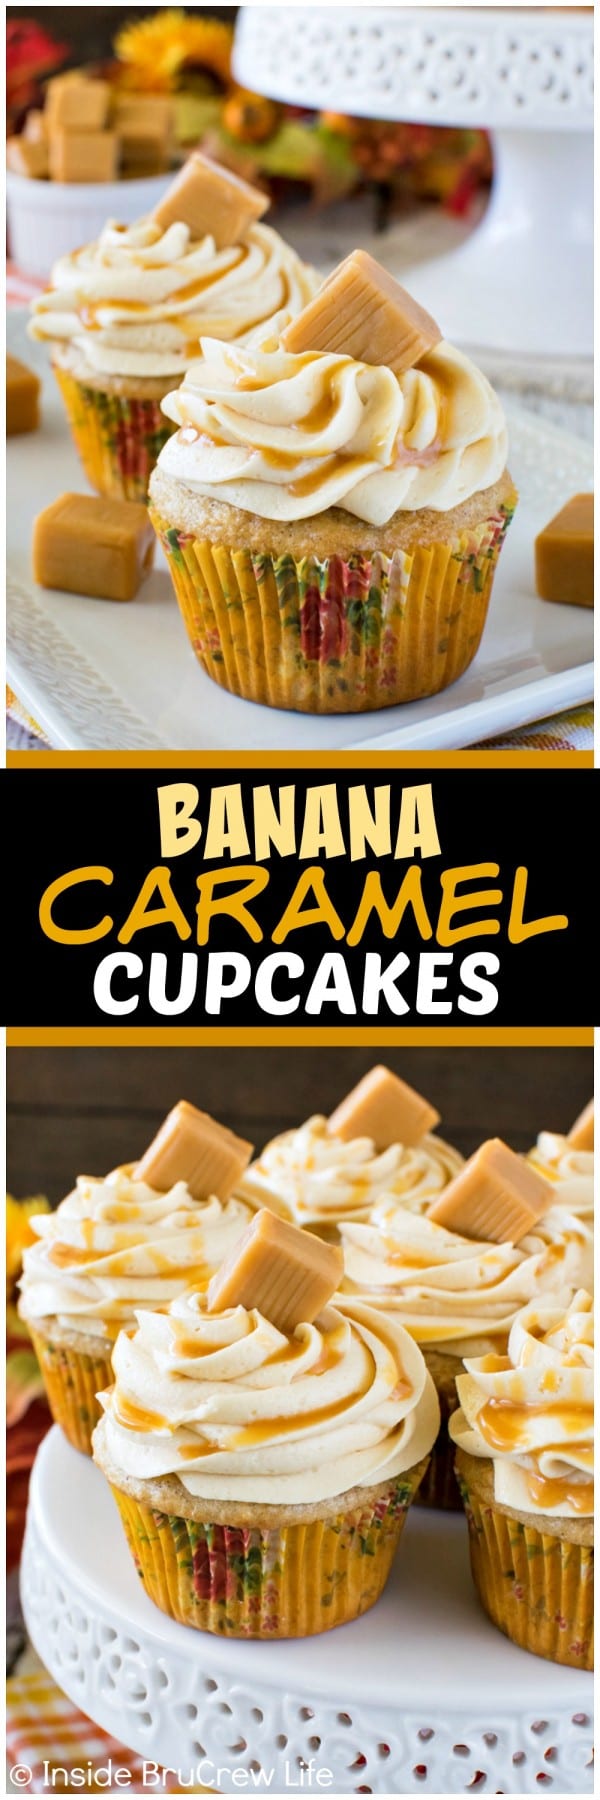 Banana Caramel Cupcakes - three times the caramel gives these easy banana cupcakes a sweet flavor. Great dessert recipe for parties!